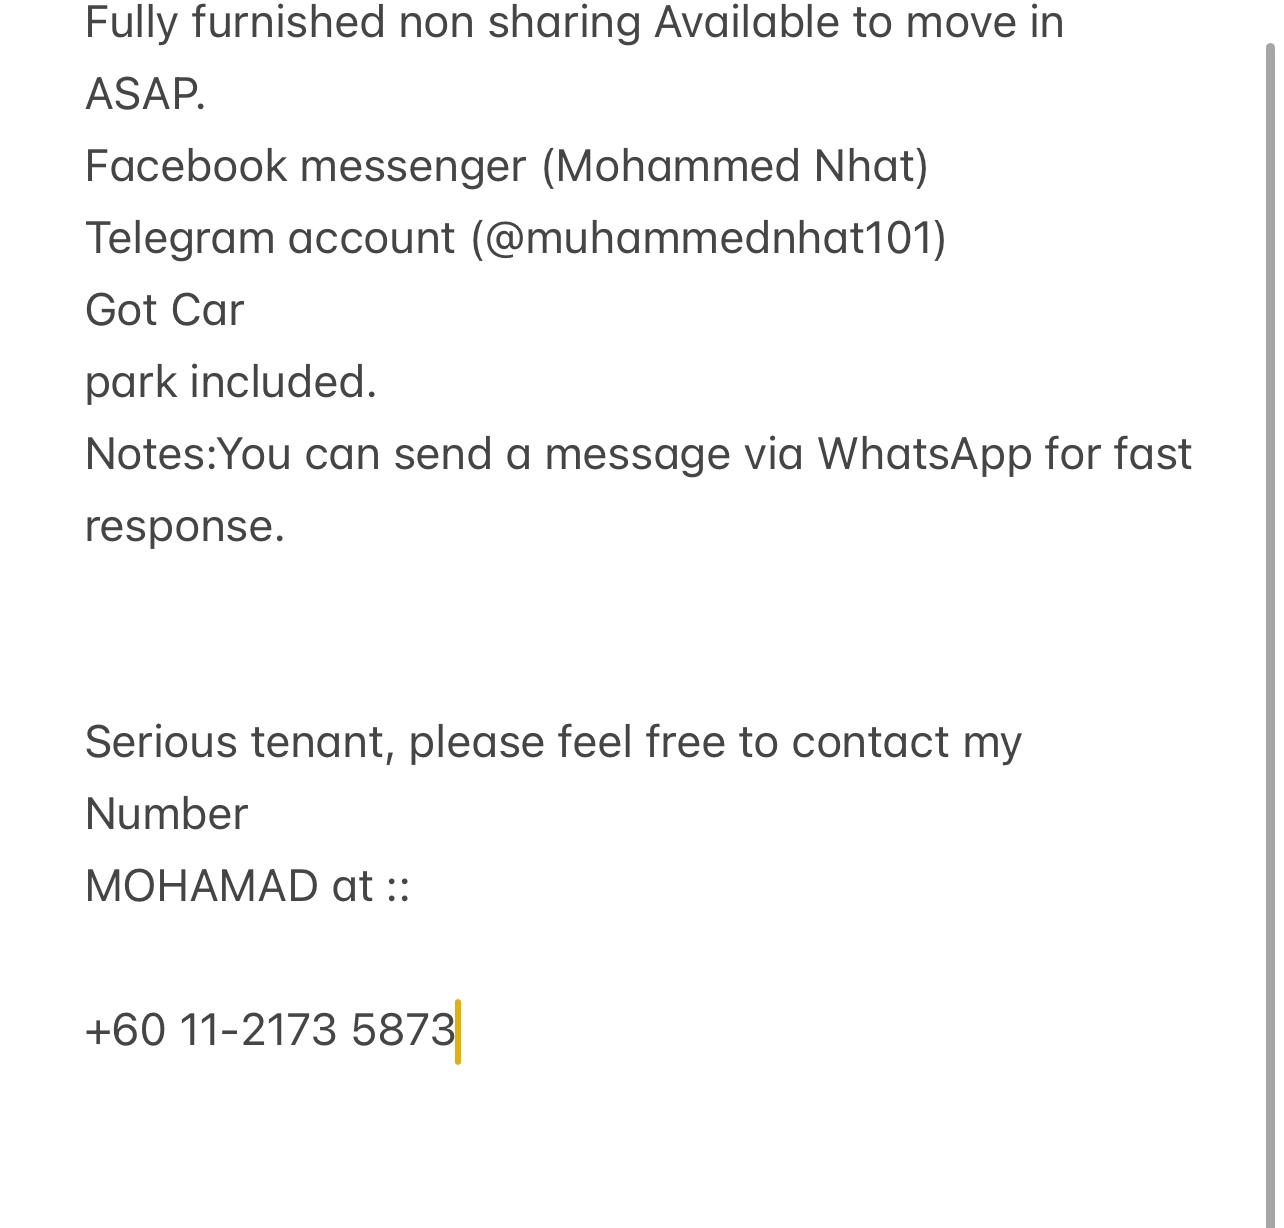 room for rent, master room, oya lorong 10, Send the owner a message on WhatsApp/facebook if you want to RENT the unit facebook (Mohammed Nhat)&Telegram(@muhammednhat101) Fully furnished non sharing :(comfortable)